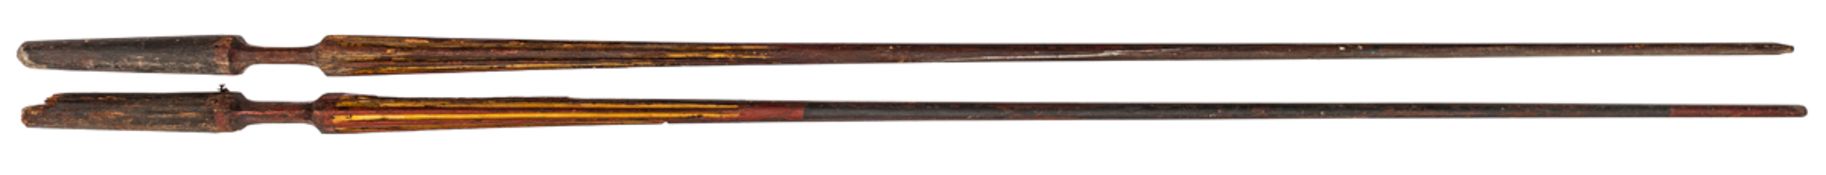 A pair of 16th Century Jousting lances, 137” and 136” in length, with 8 flutes to shafts which